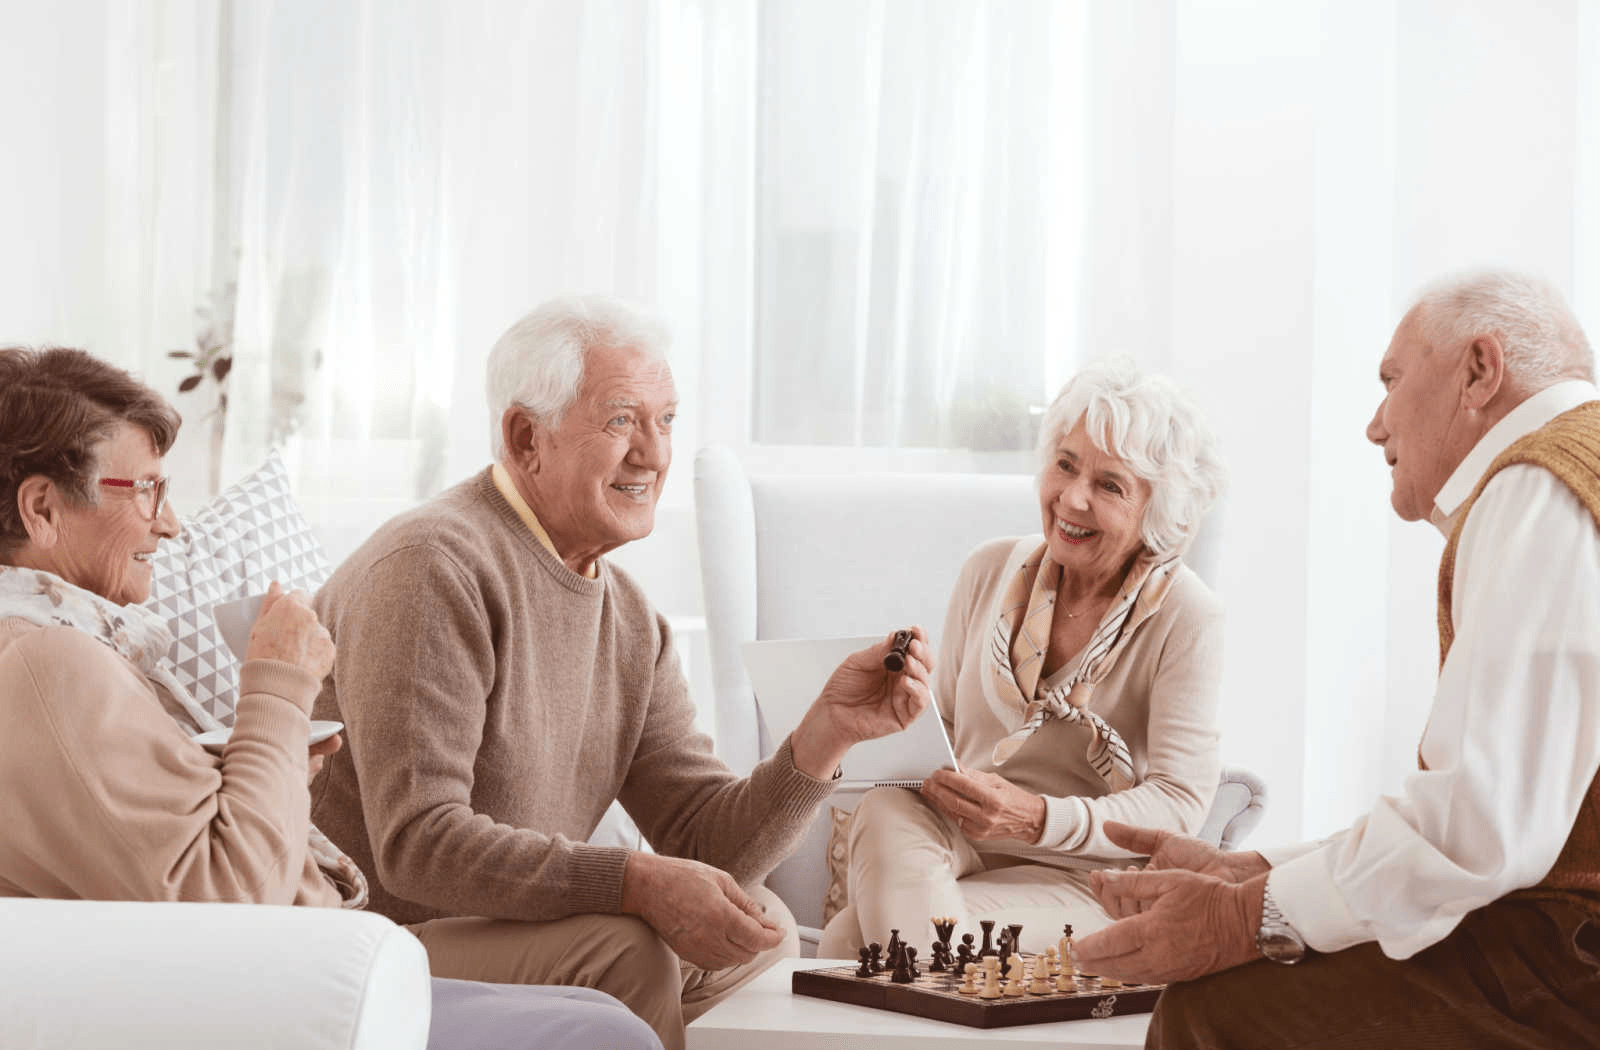 5 Benefits of Arts and Crafts for Seniors